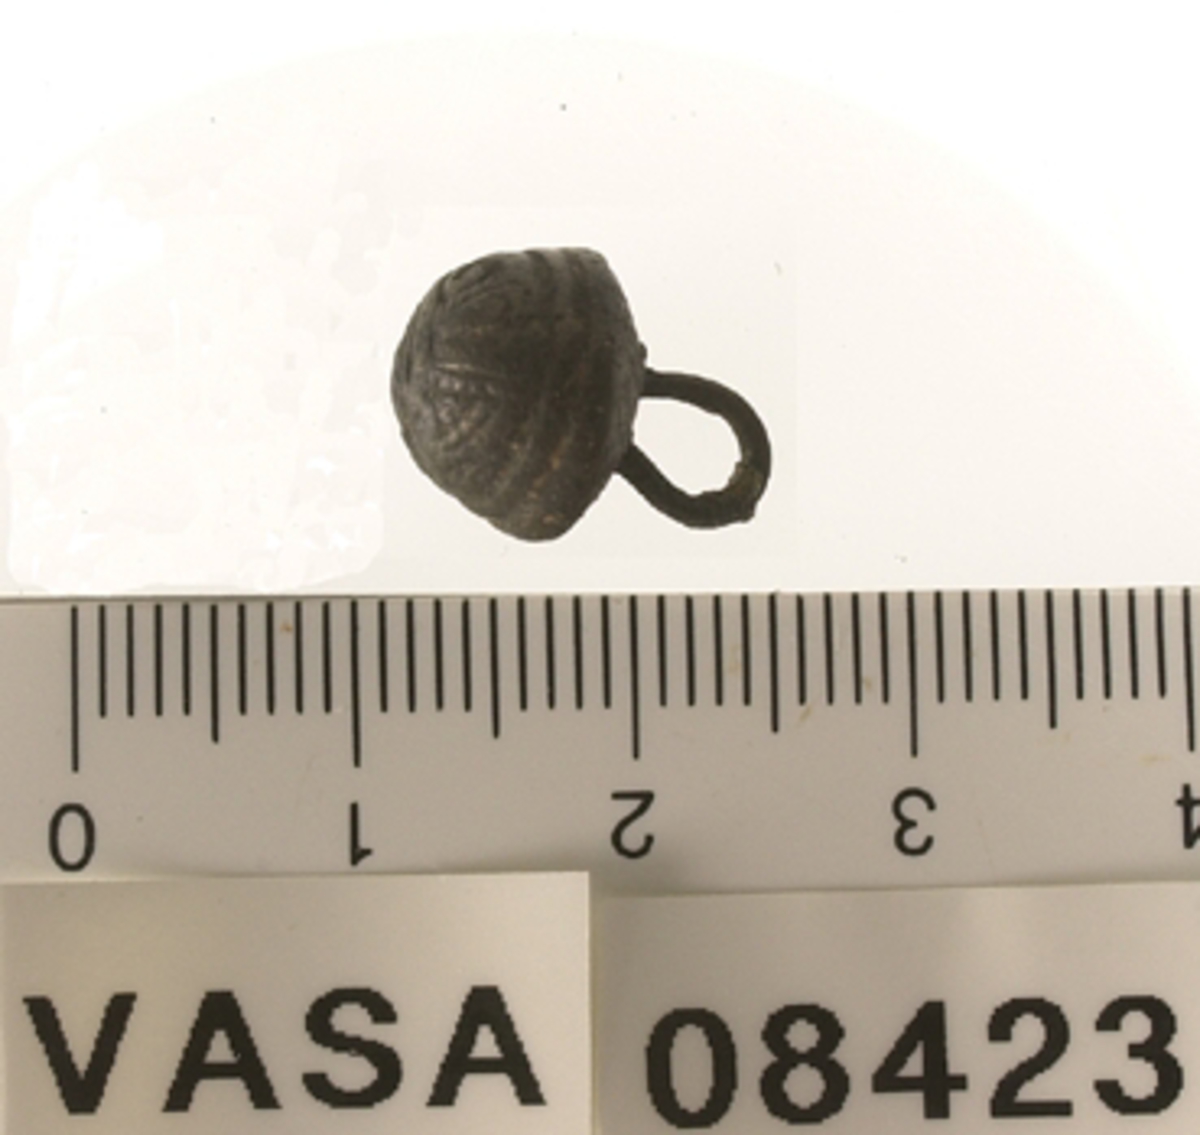 En rundad knapp med halvkonisk undersida och trådögla, samt dekor på huvudet.



Text in English: Two decorated metal buttons.

One is broken, and in an envelope in the magasin. This is a half-sphere shape with a rounded bottom edge.  The decoration is too abraded to be deciphered clearly. The shank has been broken off right at the head, evidence of wire shank still in holes in head.  Shank is in envelope with head.

Full button is located in livet ombord.  It is a half-sphere shape with a slightly convex bottom.  The decoration is too worn to decipher clearly, but it appears asymmetrical, with no centering motif on top.  The wire shank is cast in.